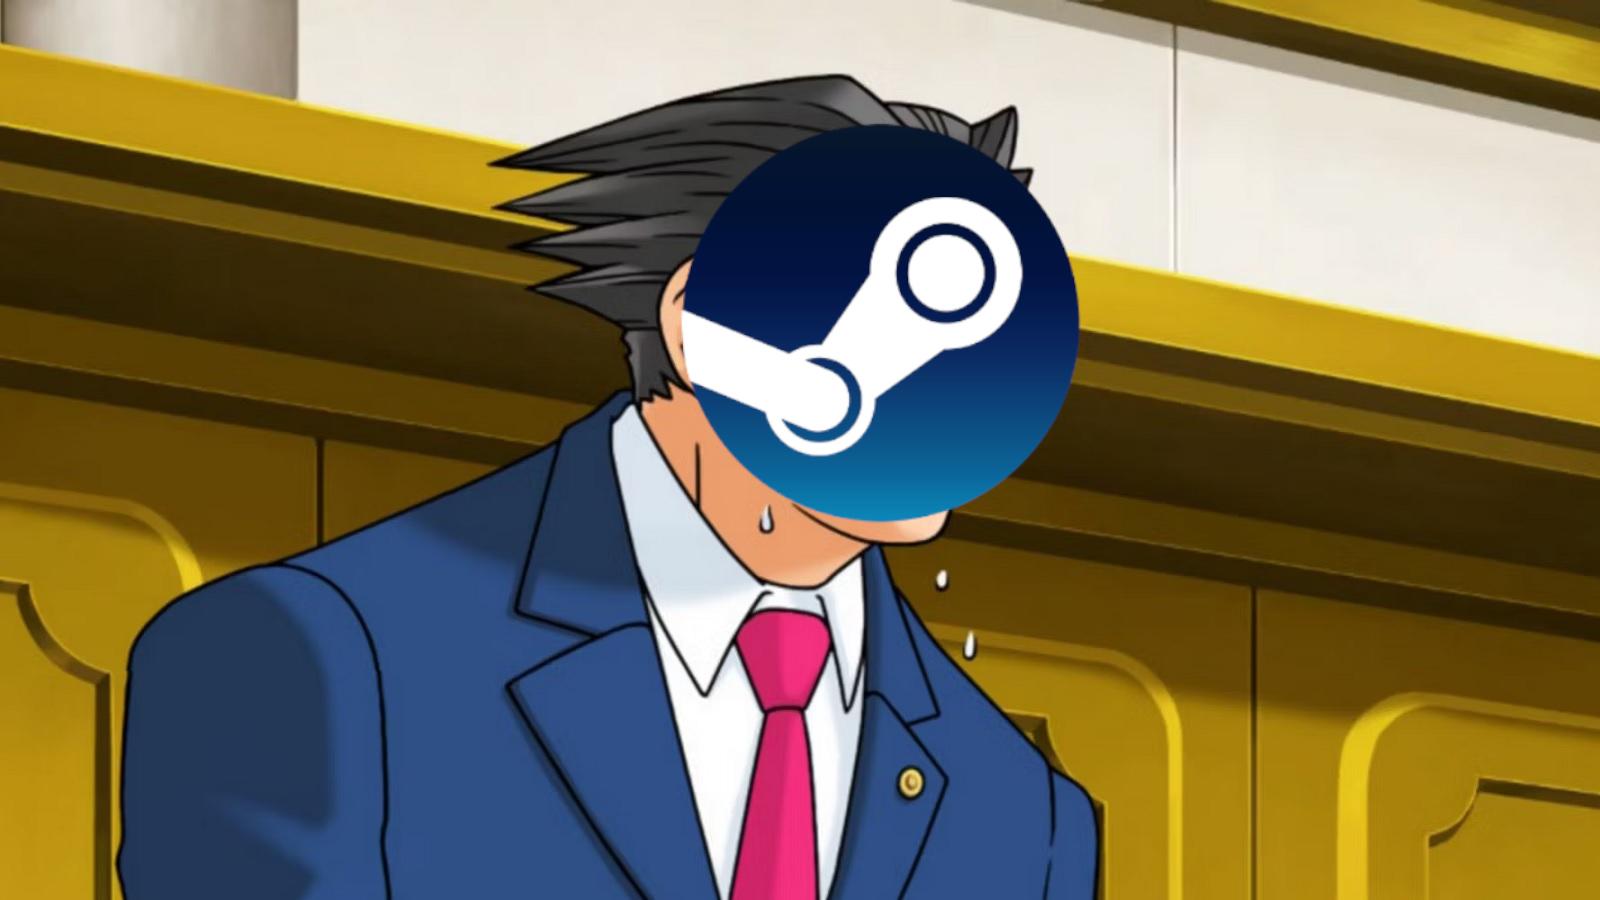 Pheonix wright on the stand with the steam logo for a face